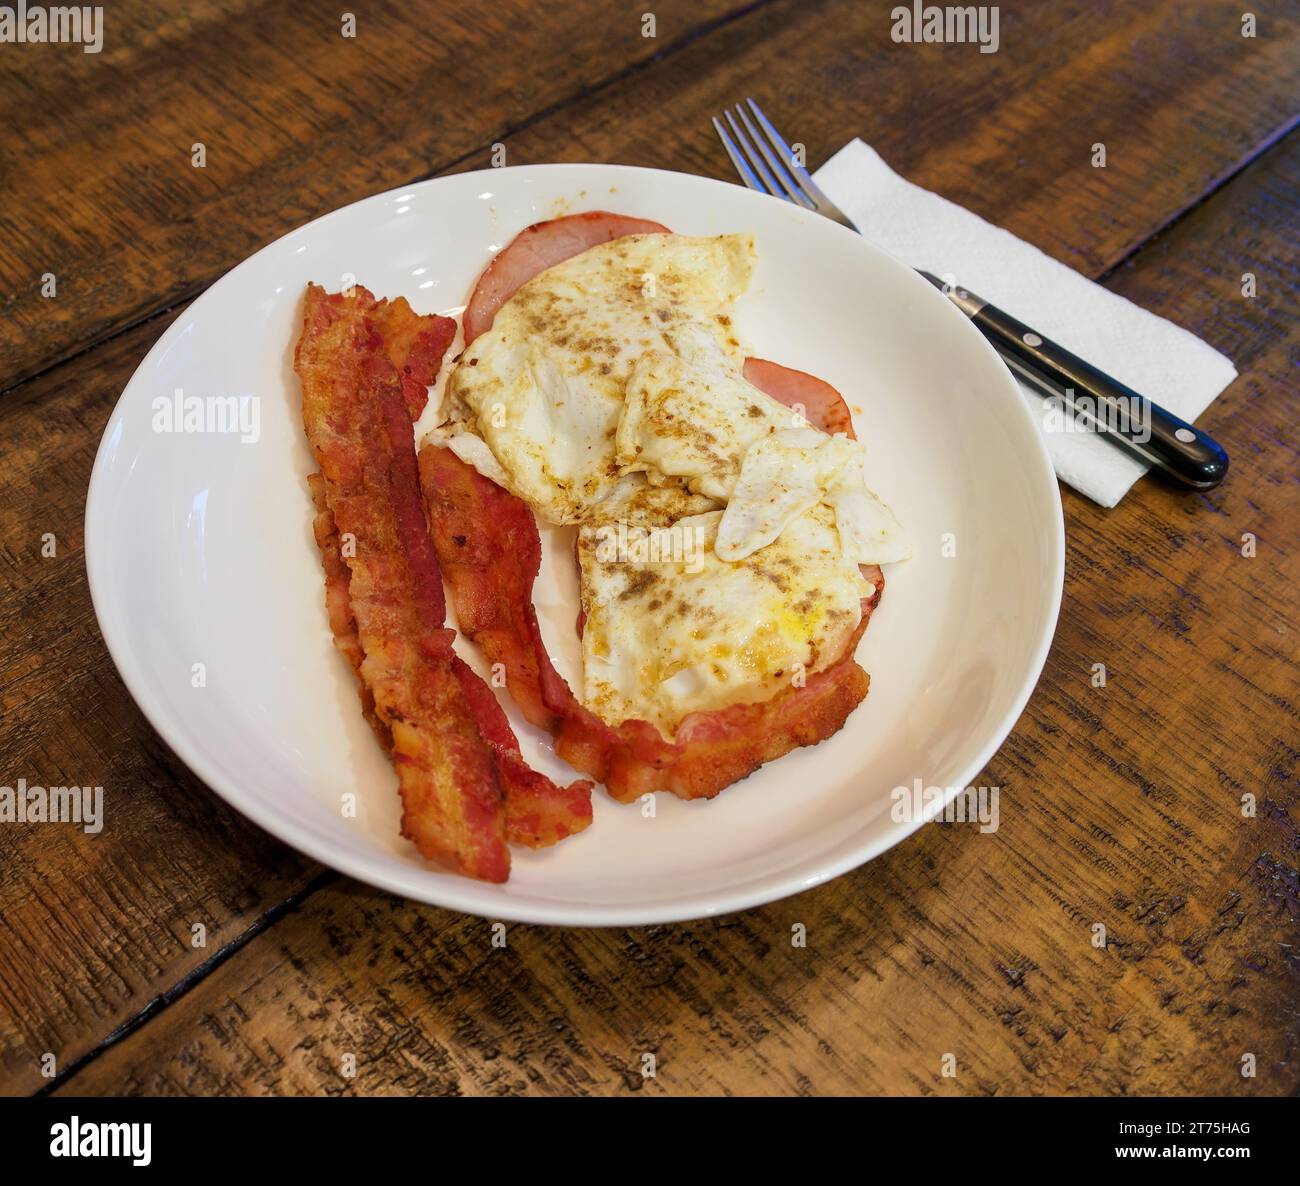 Bacon and fried eggs breakfast an American traditional breakfast on a table. Stock Photo